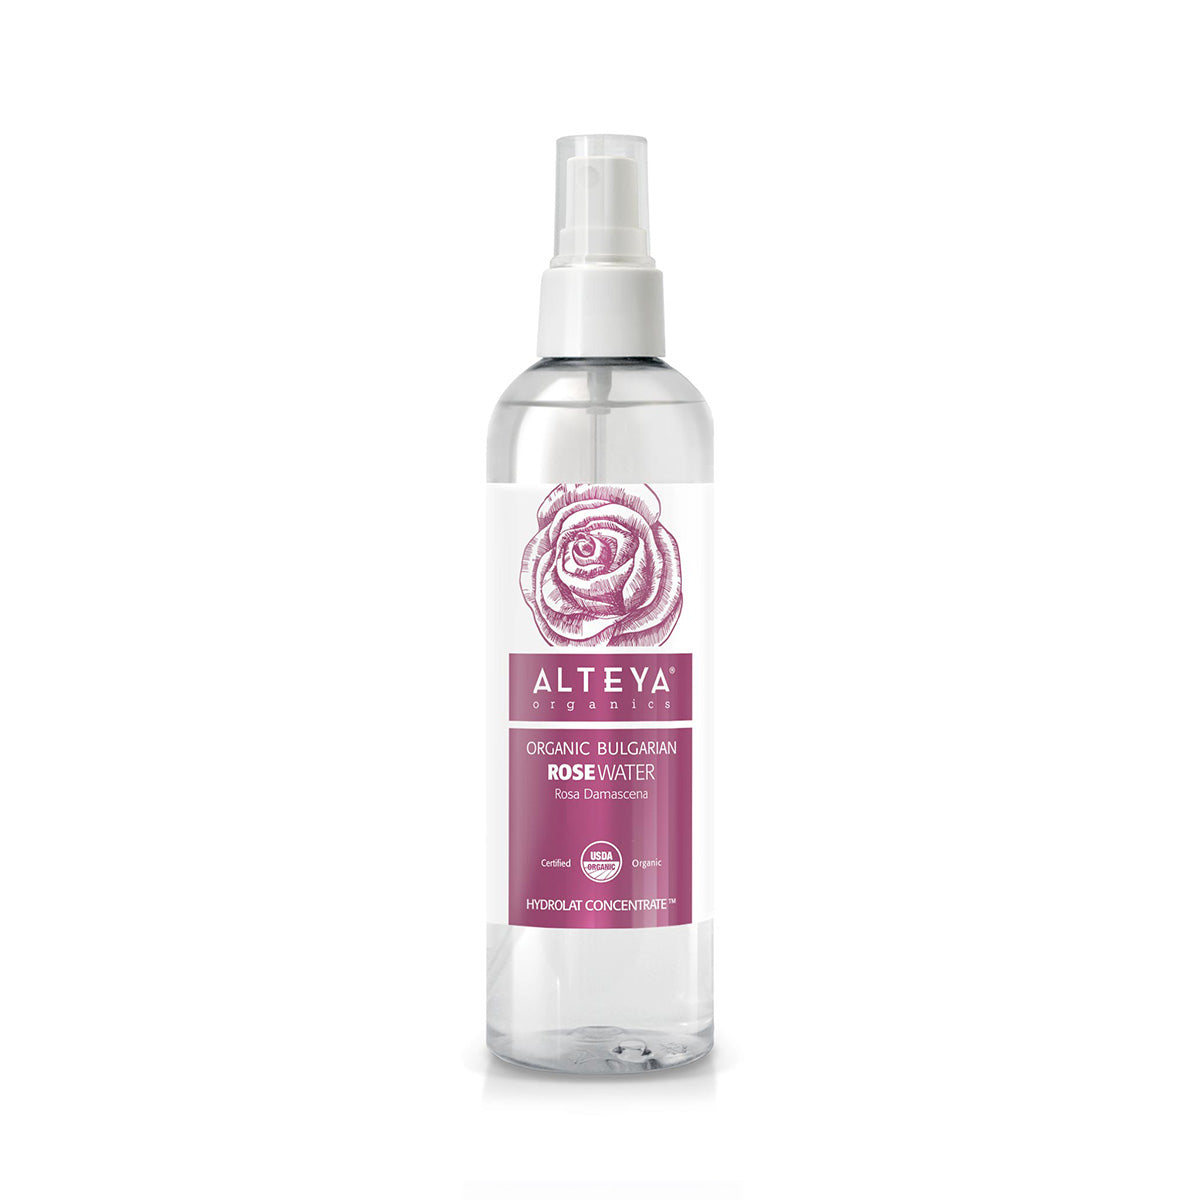 An Alteya Organics Organic Bulgarian Rose Water Toner Mist - 8.5 Fl Oz on a white background, perfect for skincare or haircare routines.